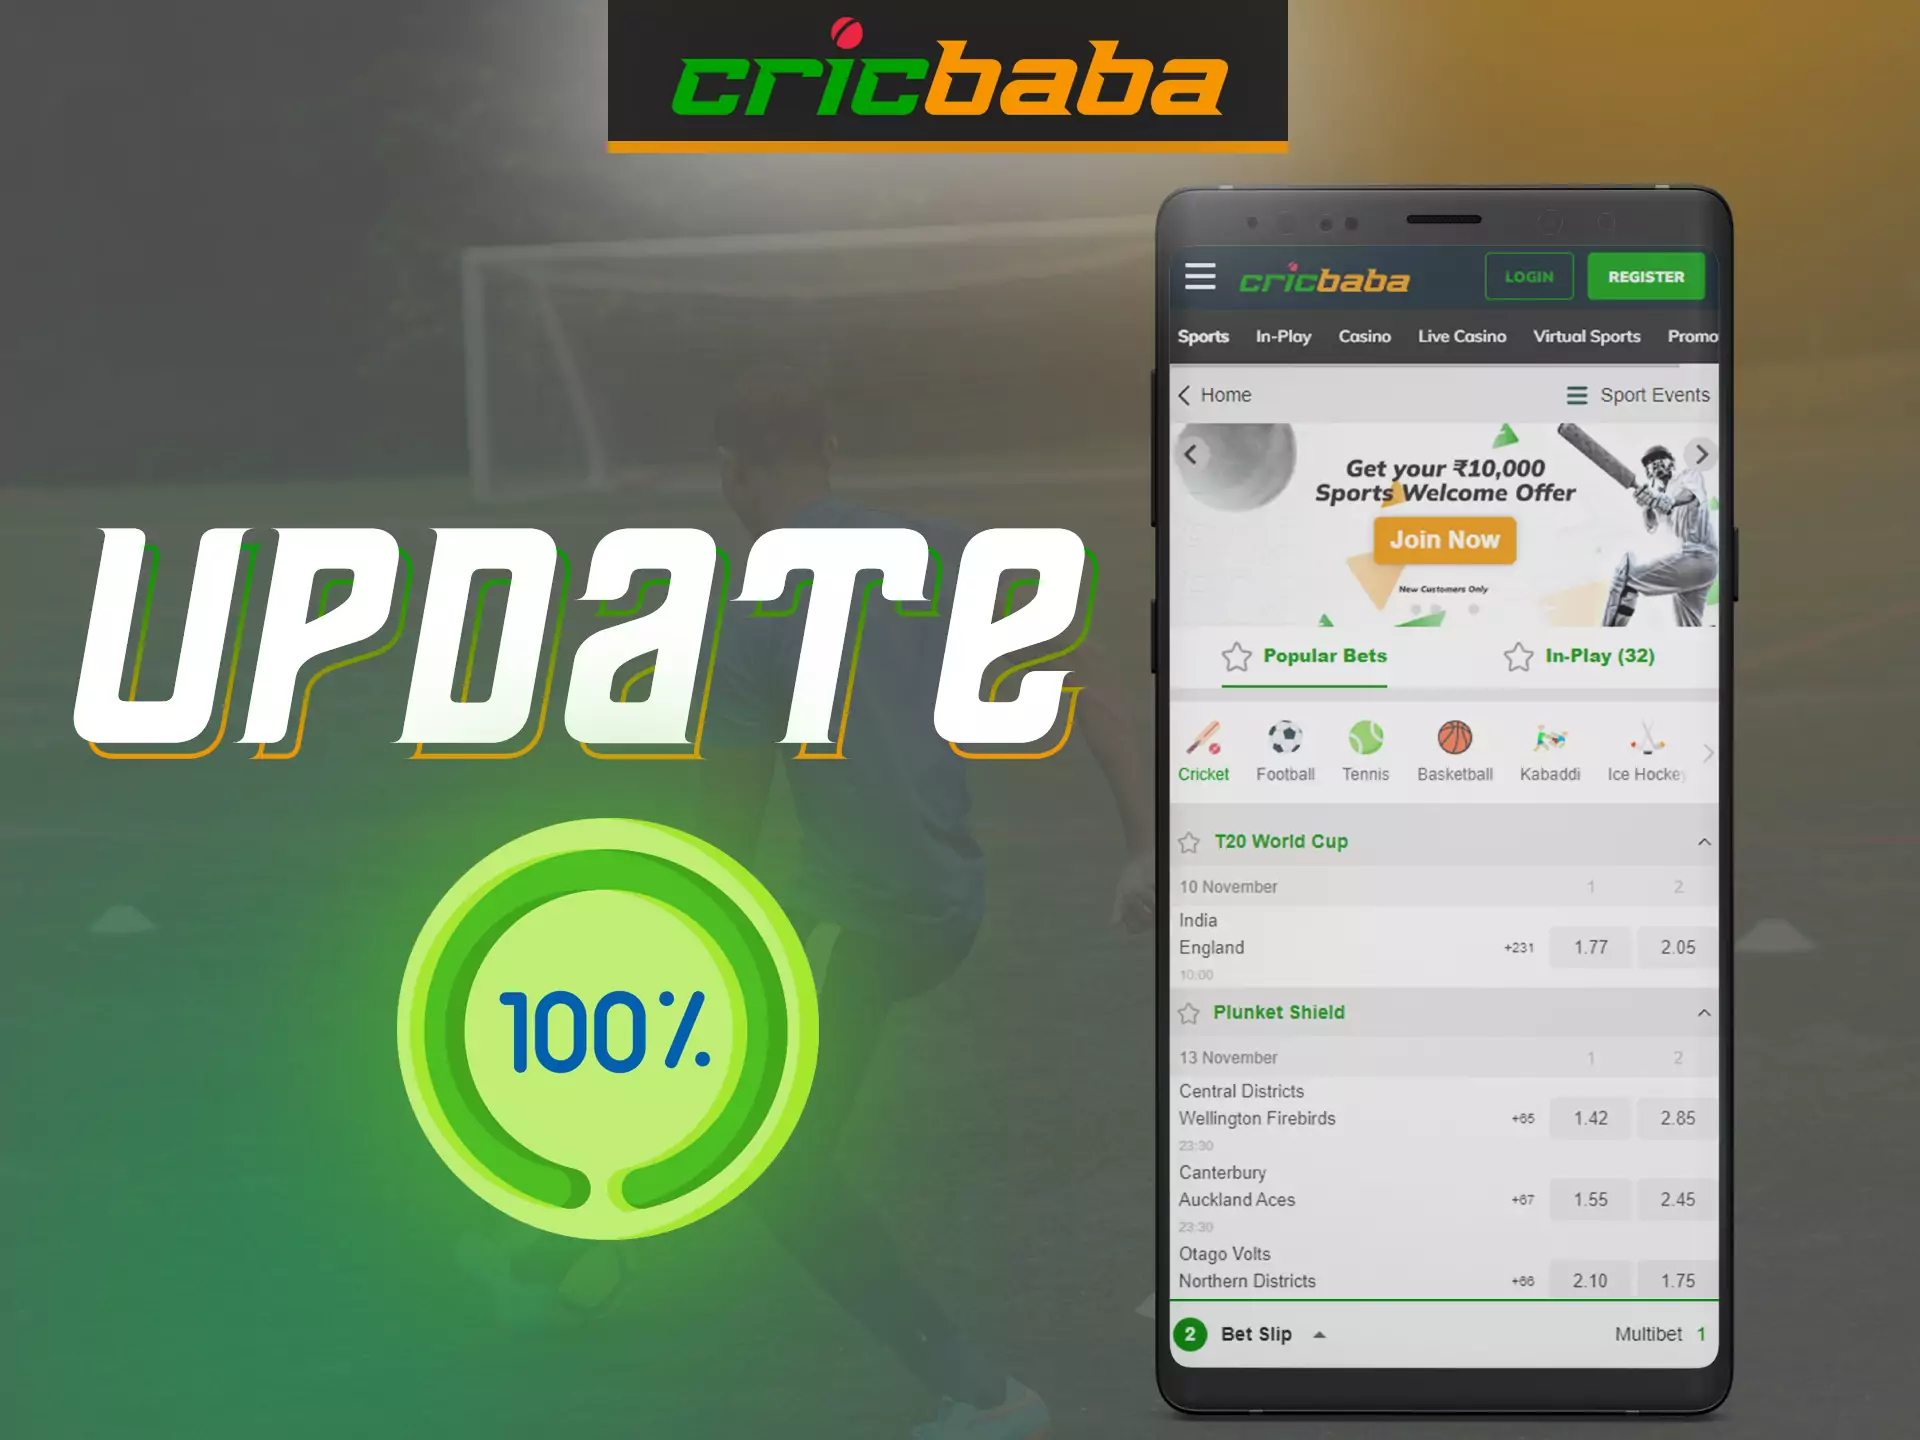 Don't forget to update your Cricbaba app, you will always be aware of new bonuses.